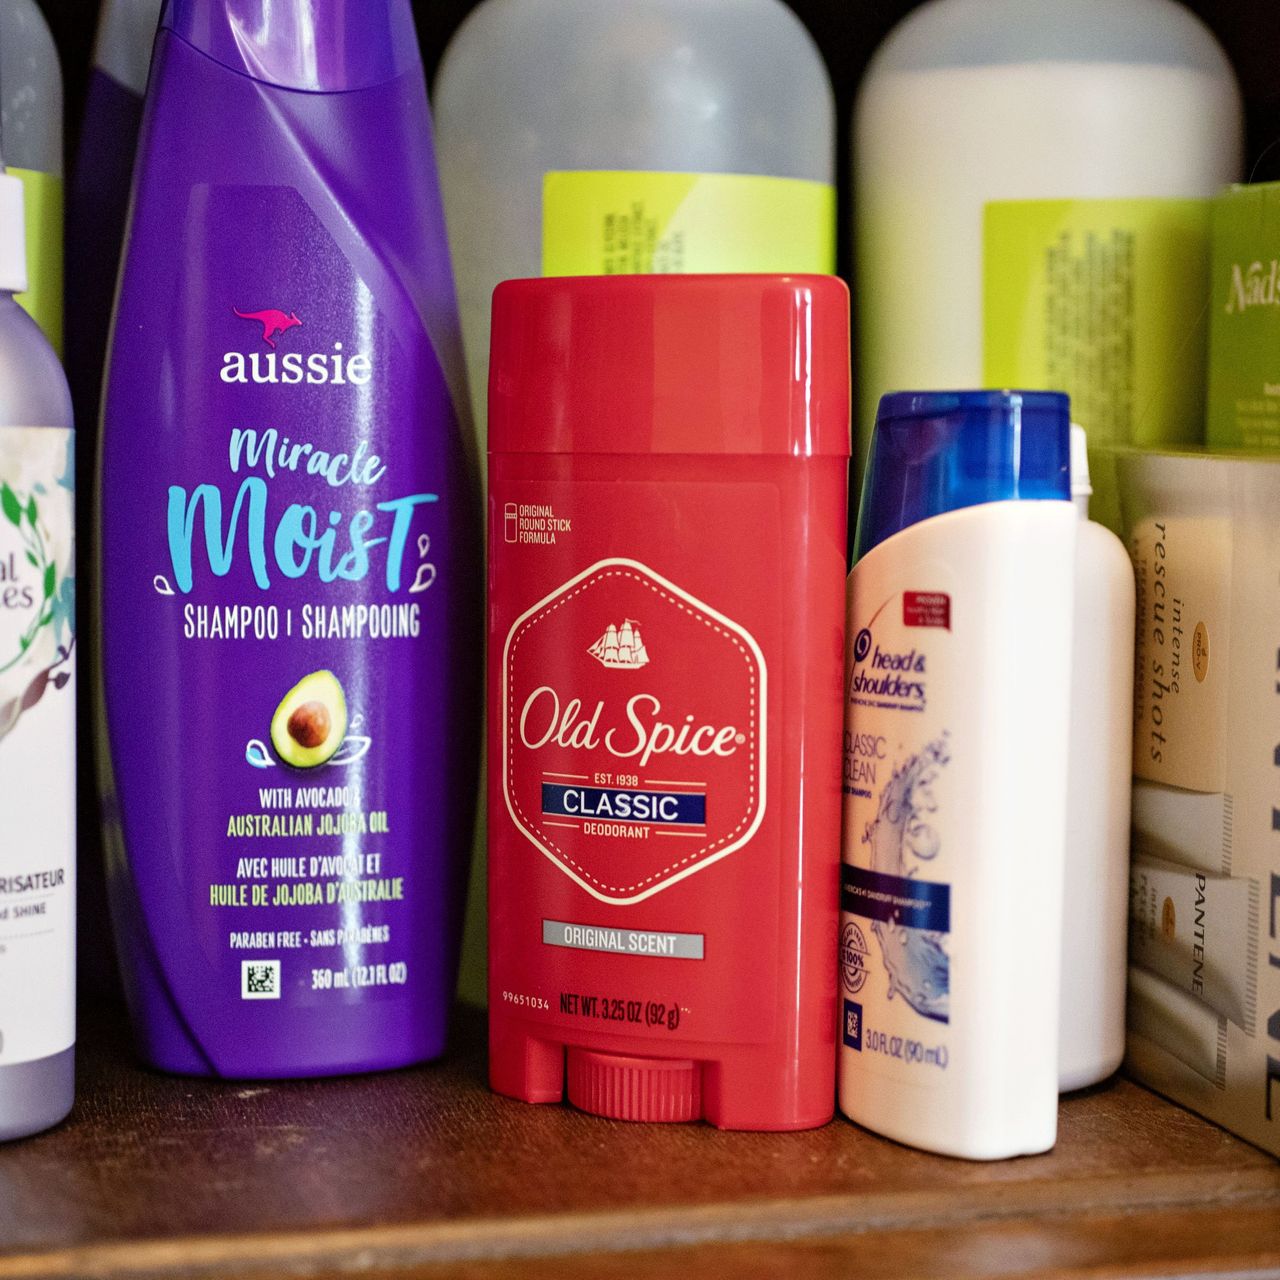 Proctors And Gamble Reviews Dry Shampoo, Conditioner Over Benzene